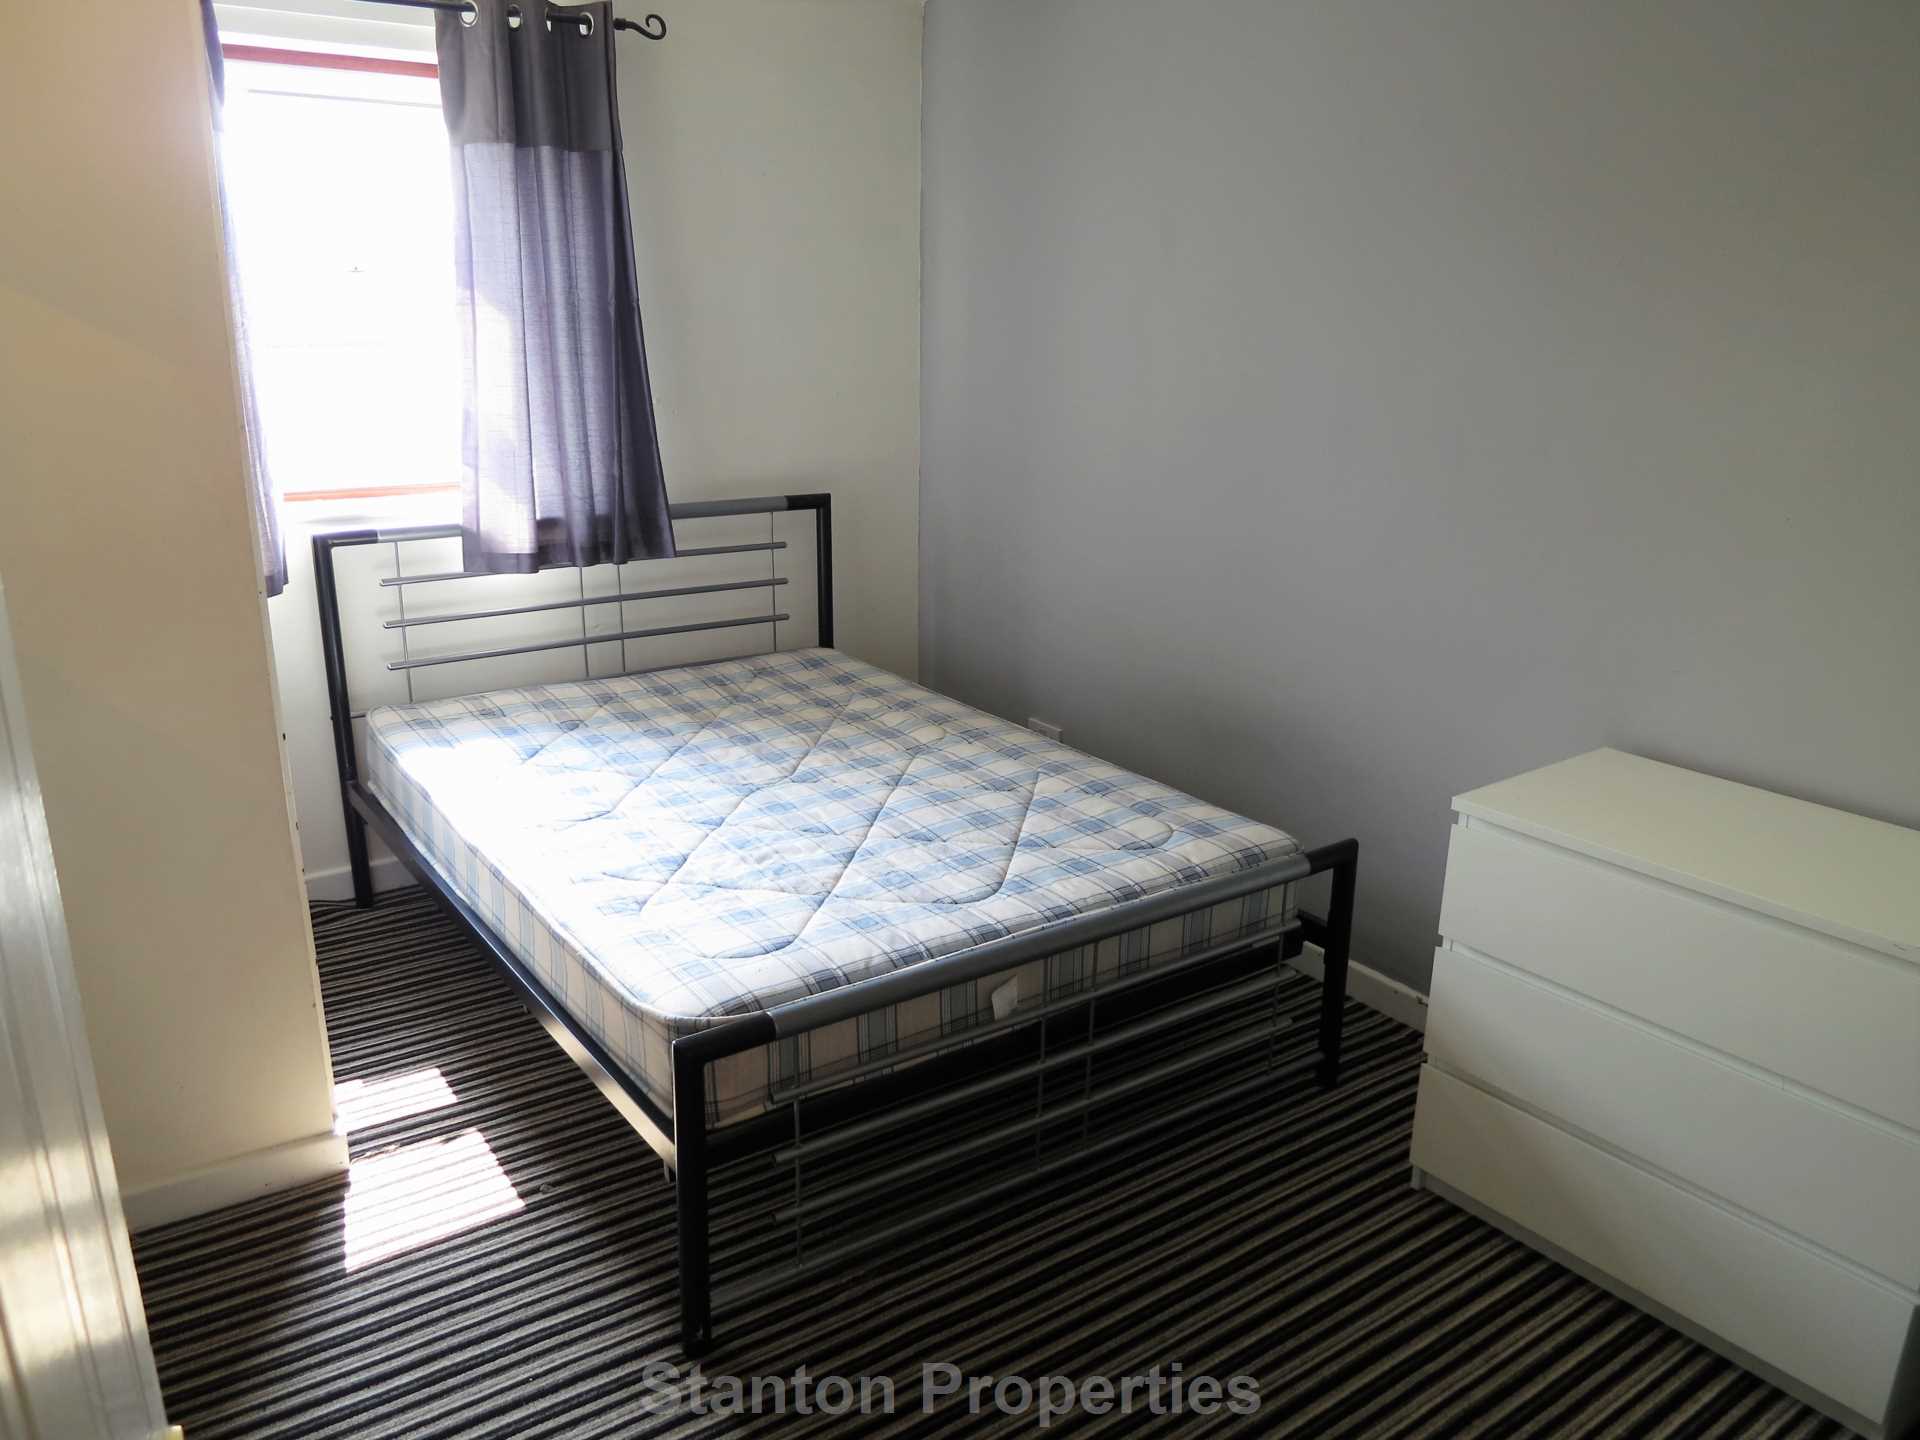 See Video Tour, £120 pppw, Copson Street, Withington, Image 7